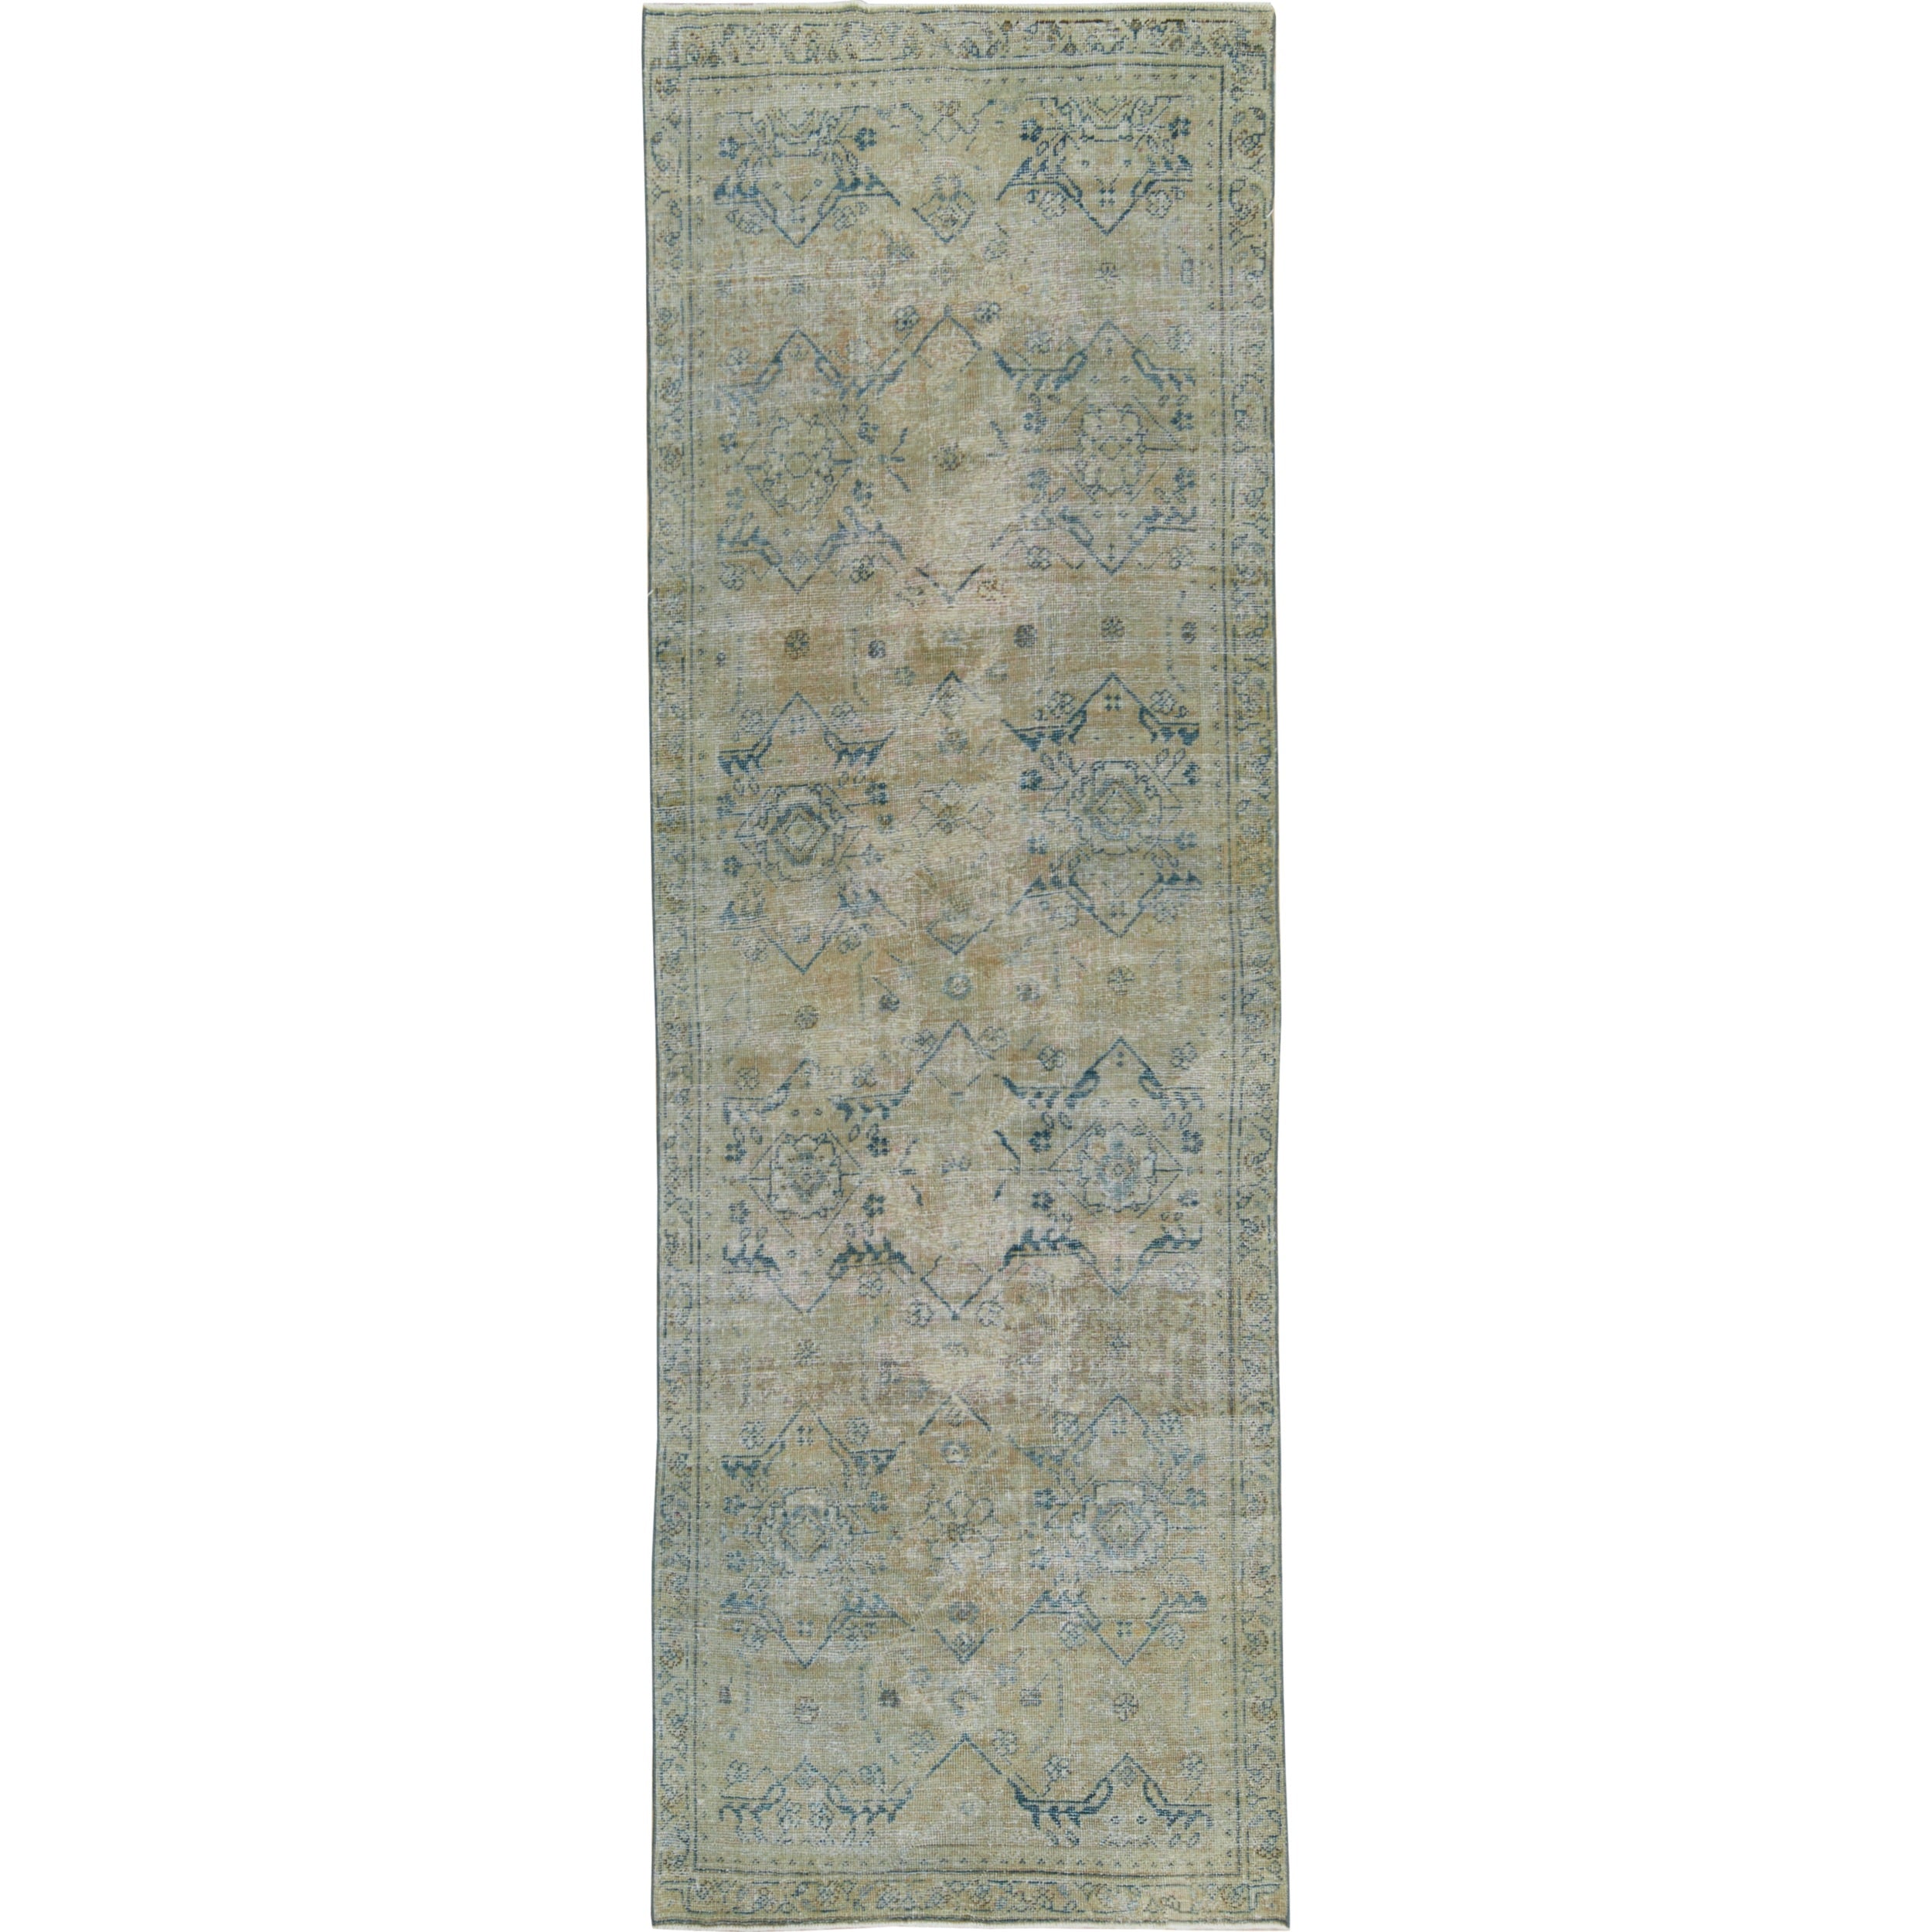 Sacrifice - The Beige Tapestry of Persian Legacy | Kuden Rugs